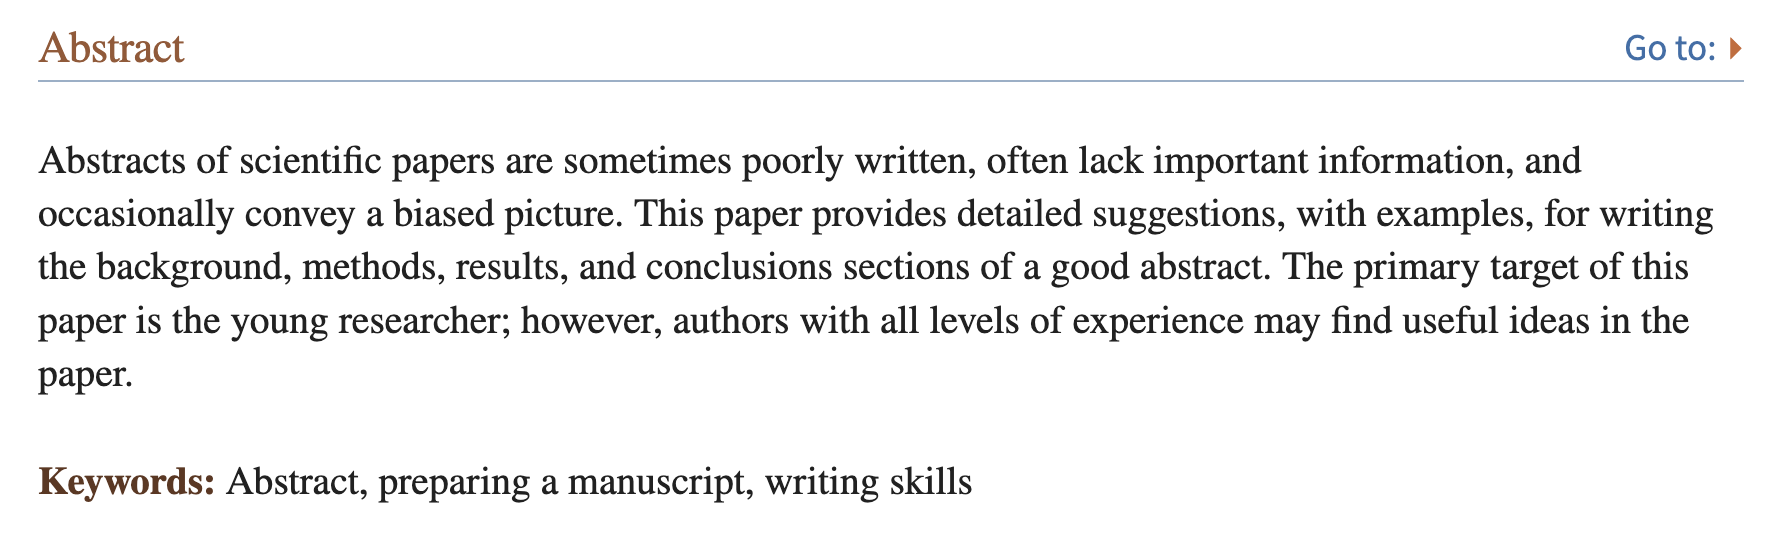 how to write an abstract?